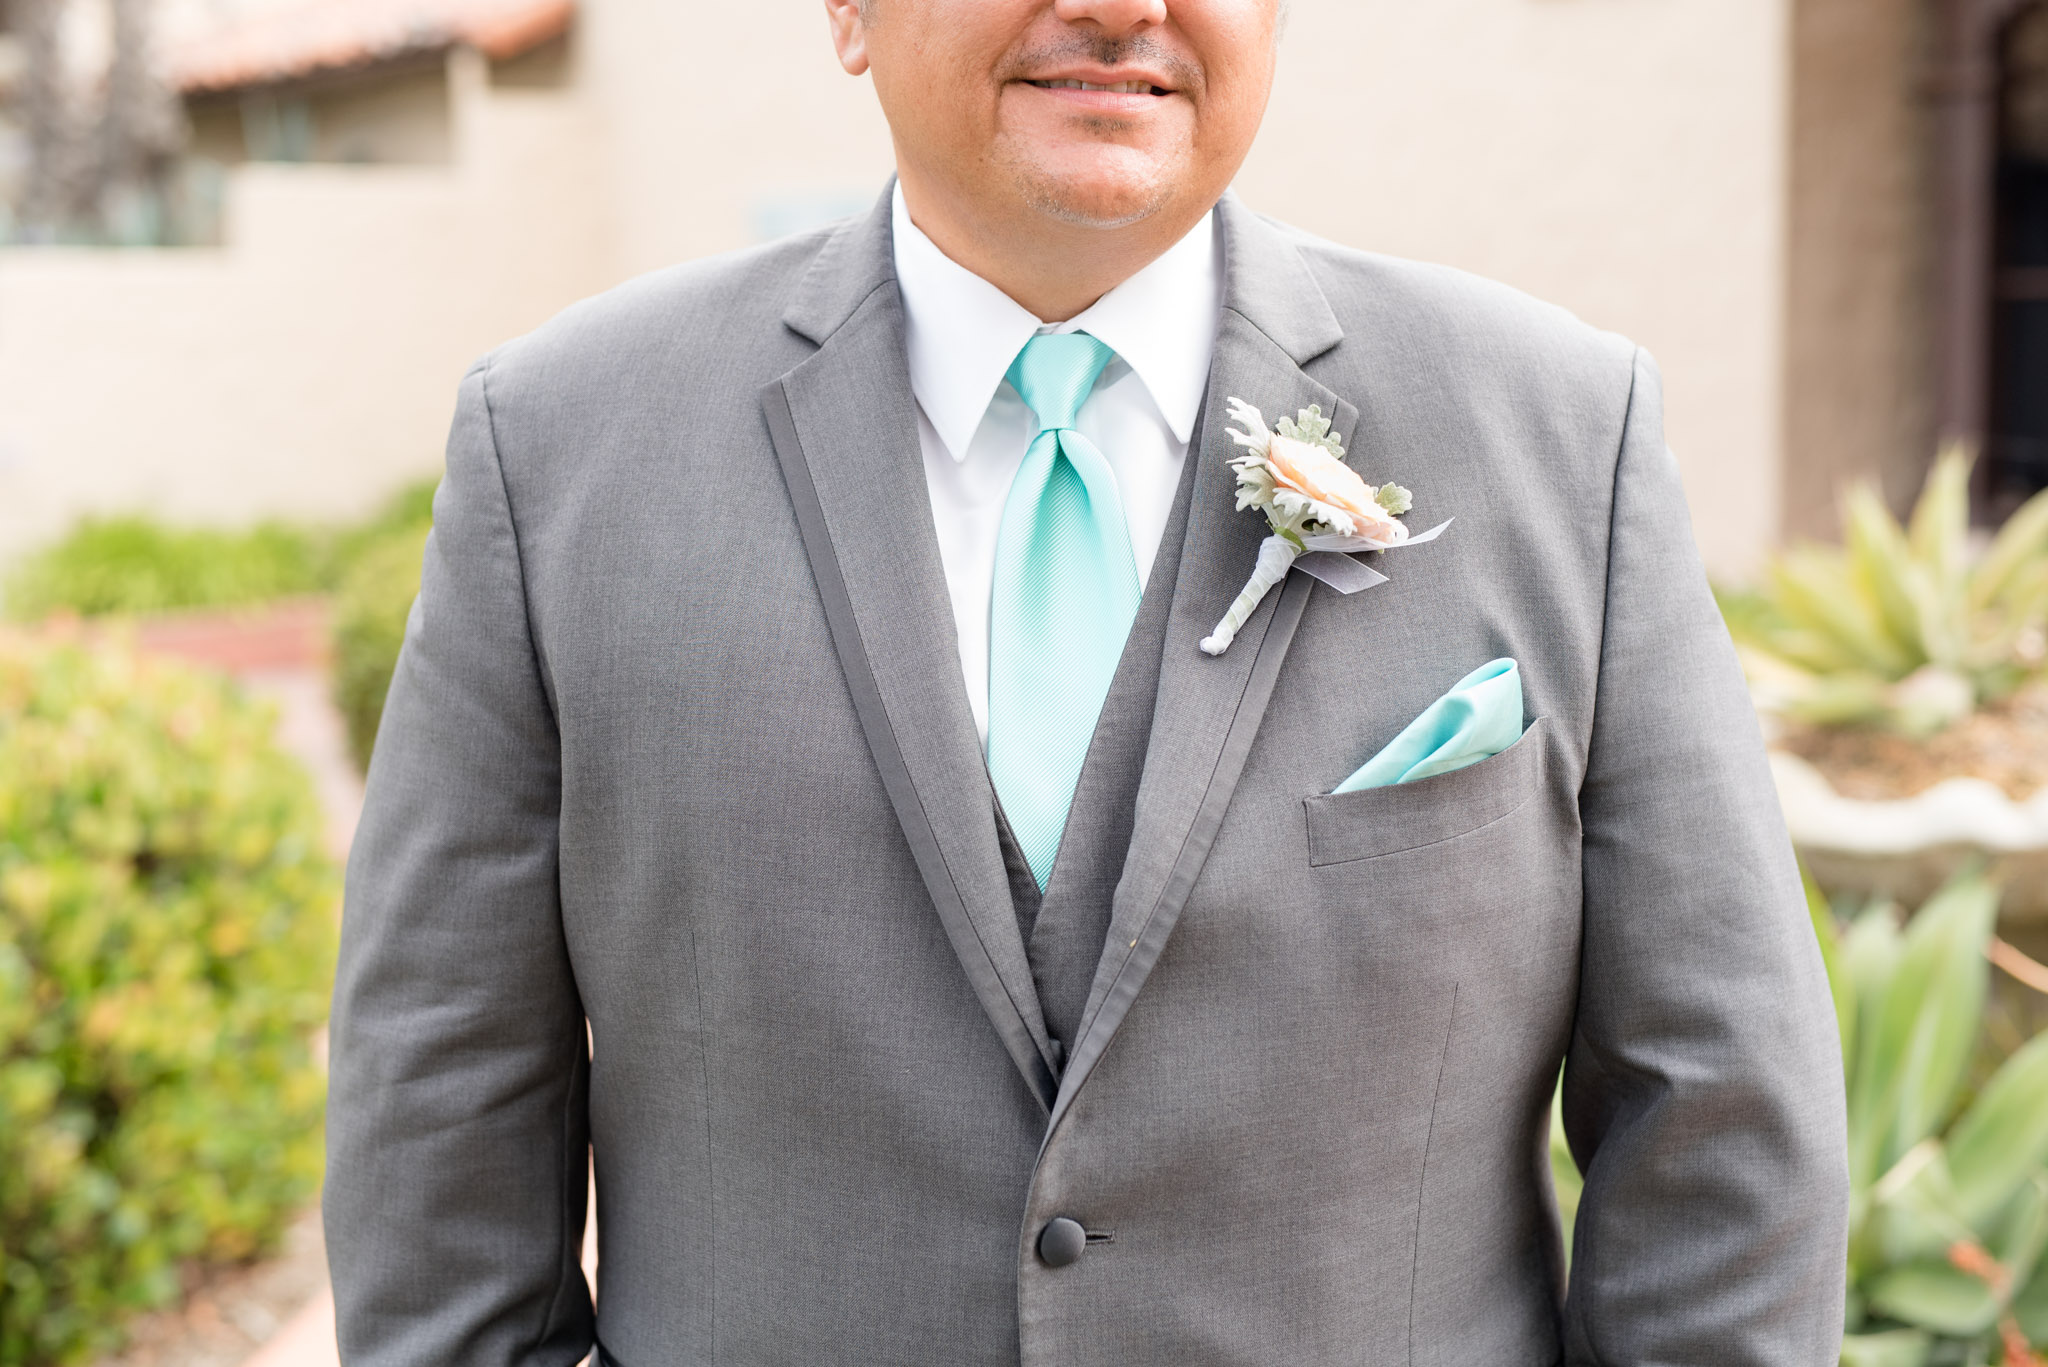 Groom's suit with spa blue tie.